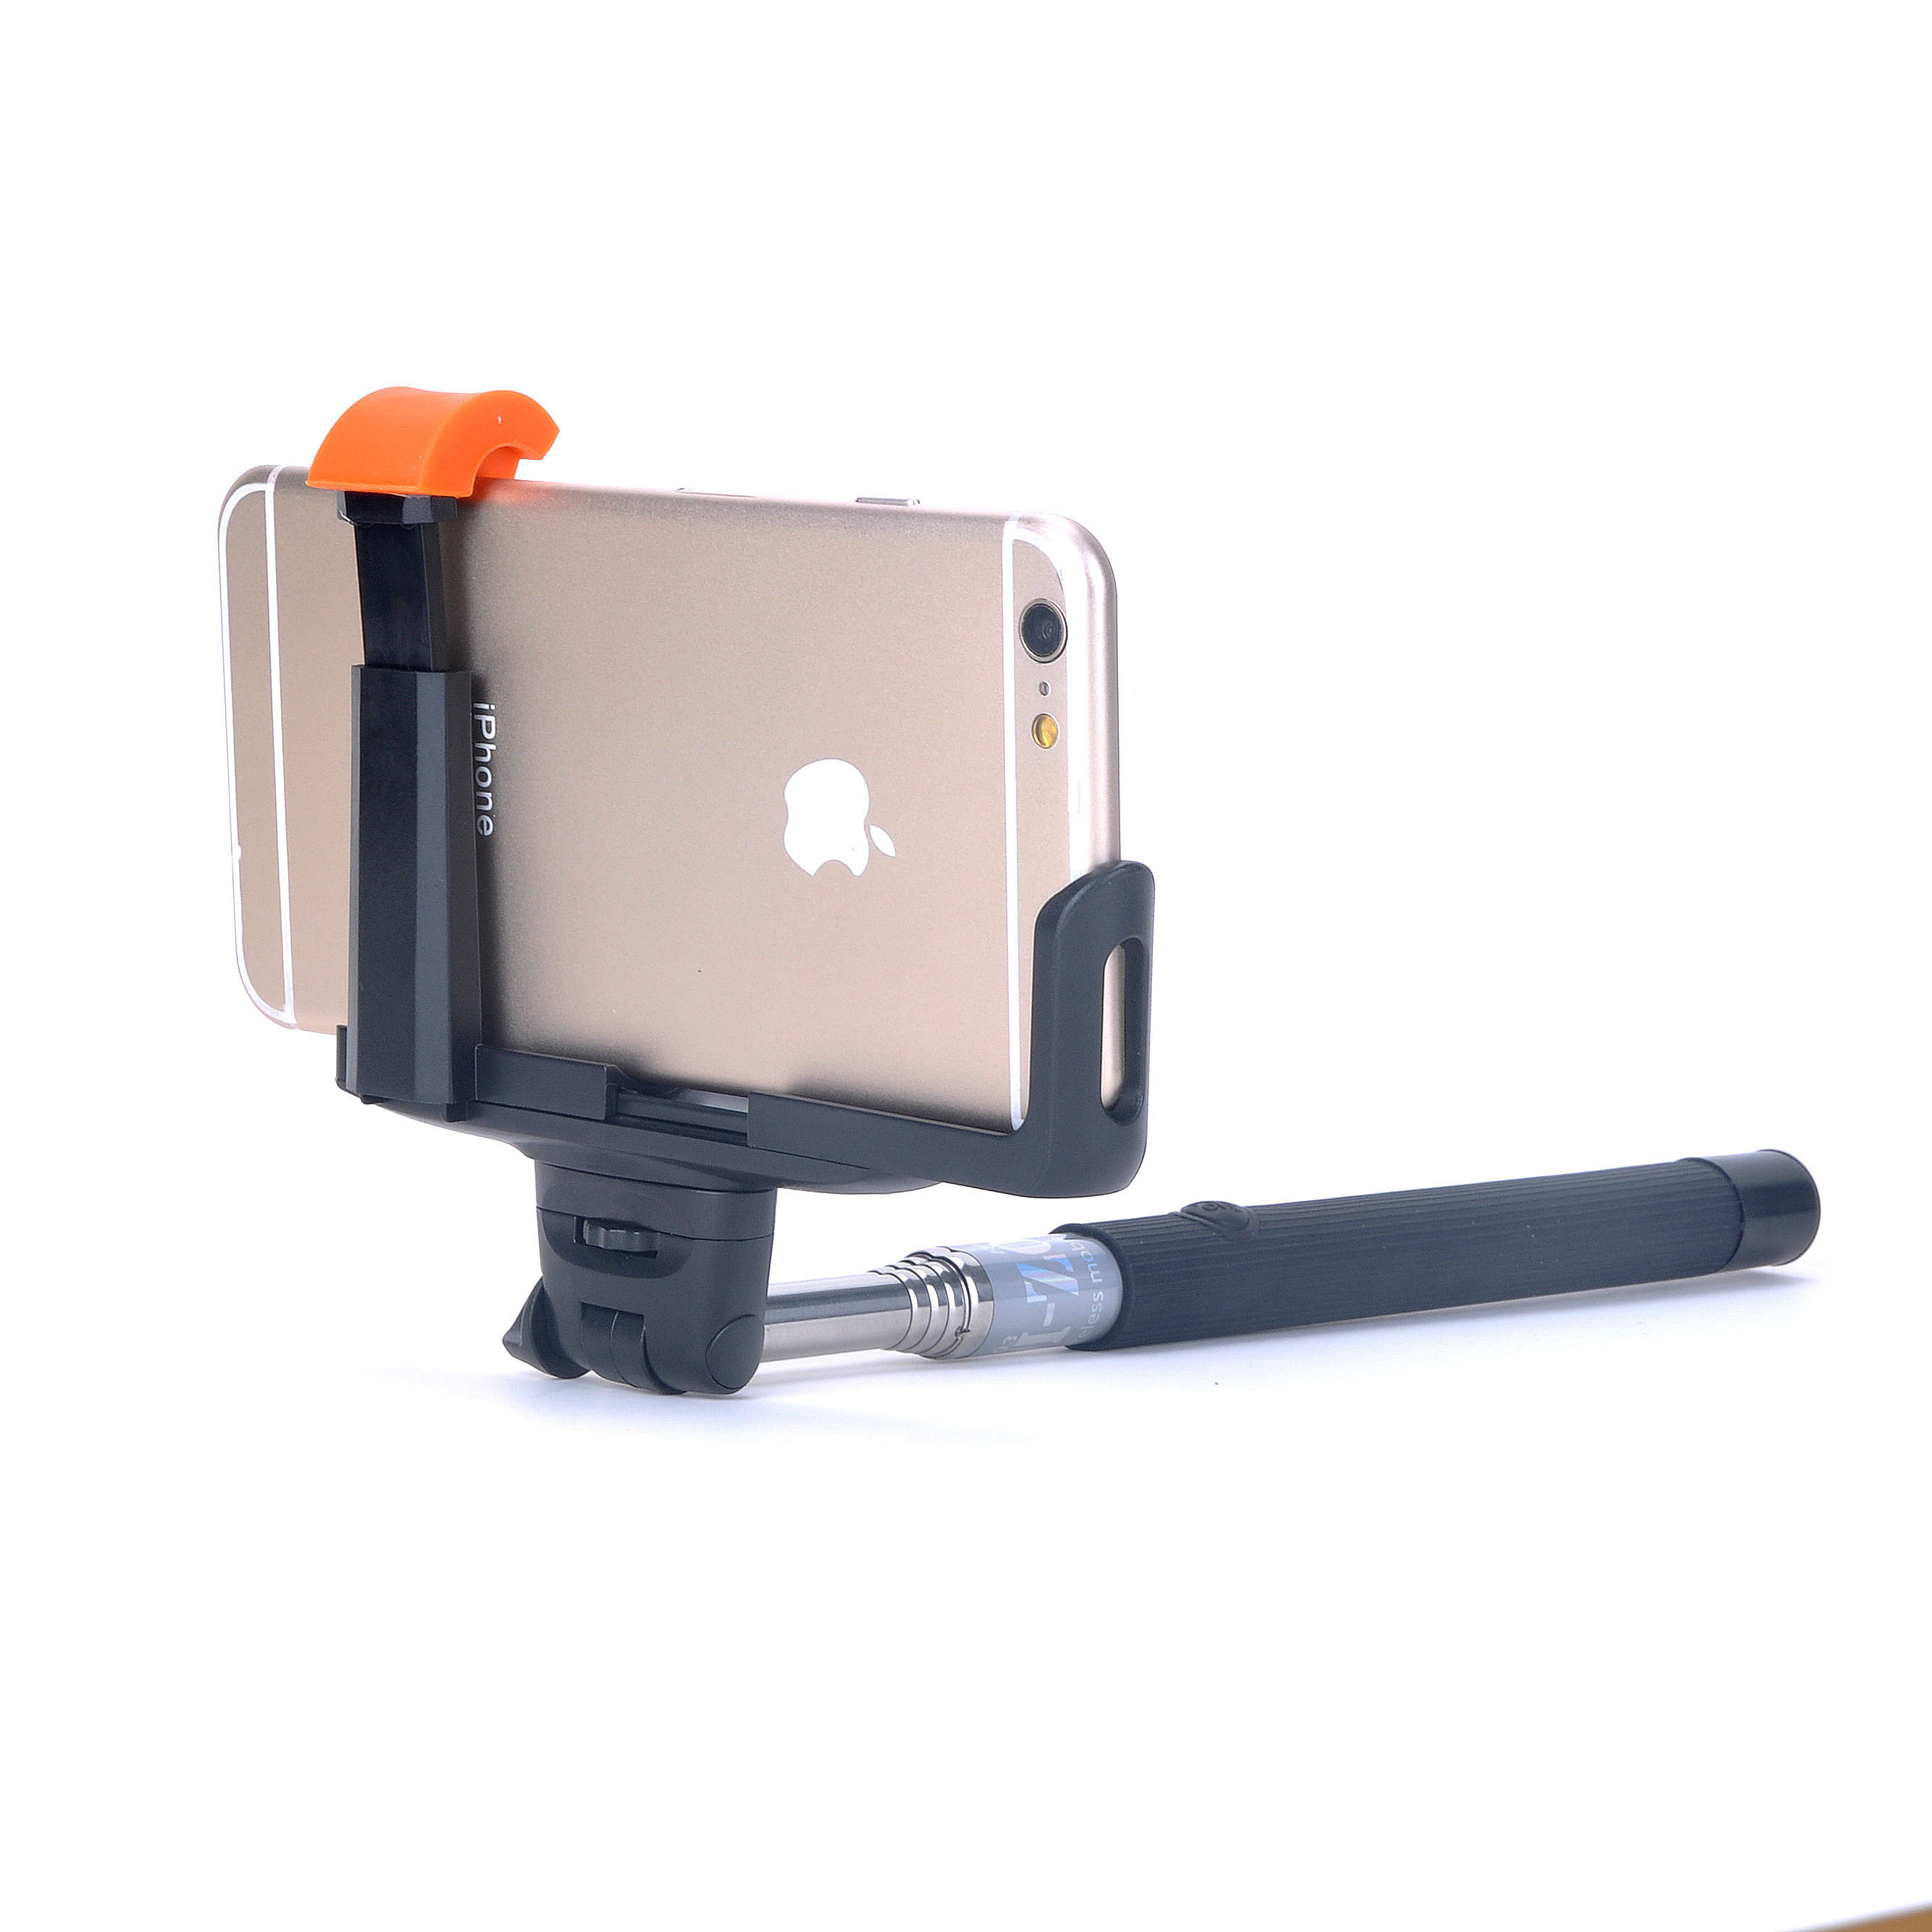 Minisuit Selfie Stick Pro with Built-In Remote for Apple & Android, Black - image 4 of 7